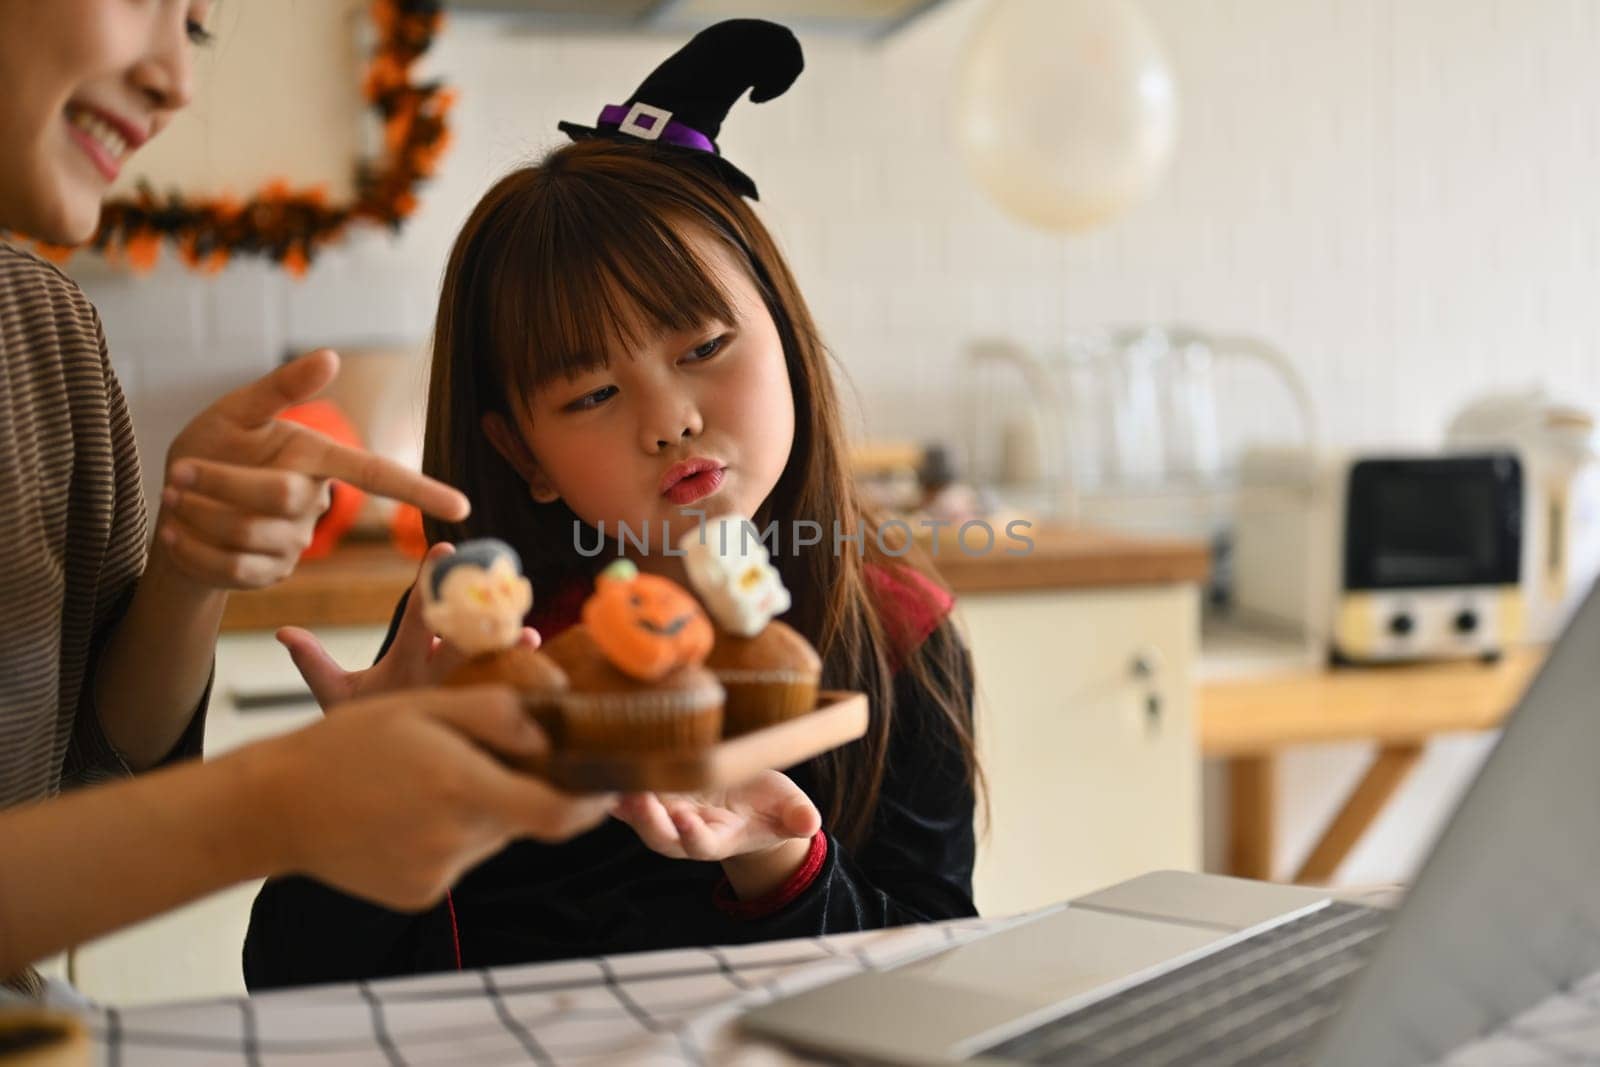 Playful little girl dressed as a witch and mother holding colorful Halloween cupcakes and video call on laptop in kitchen.